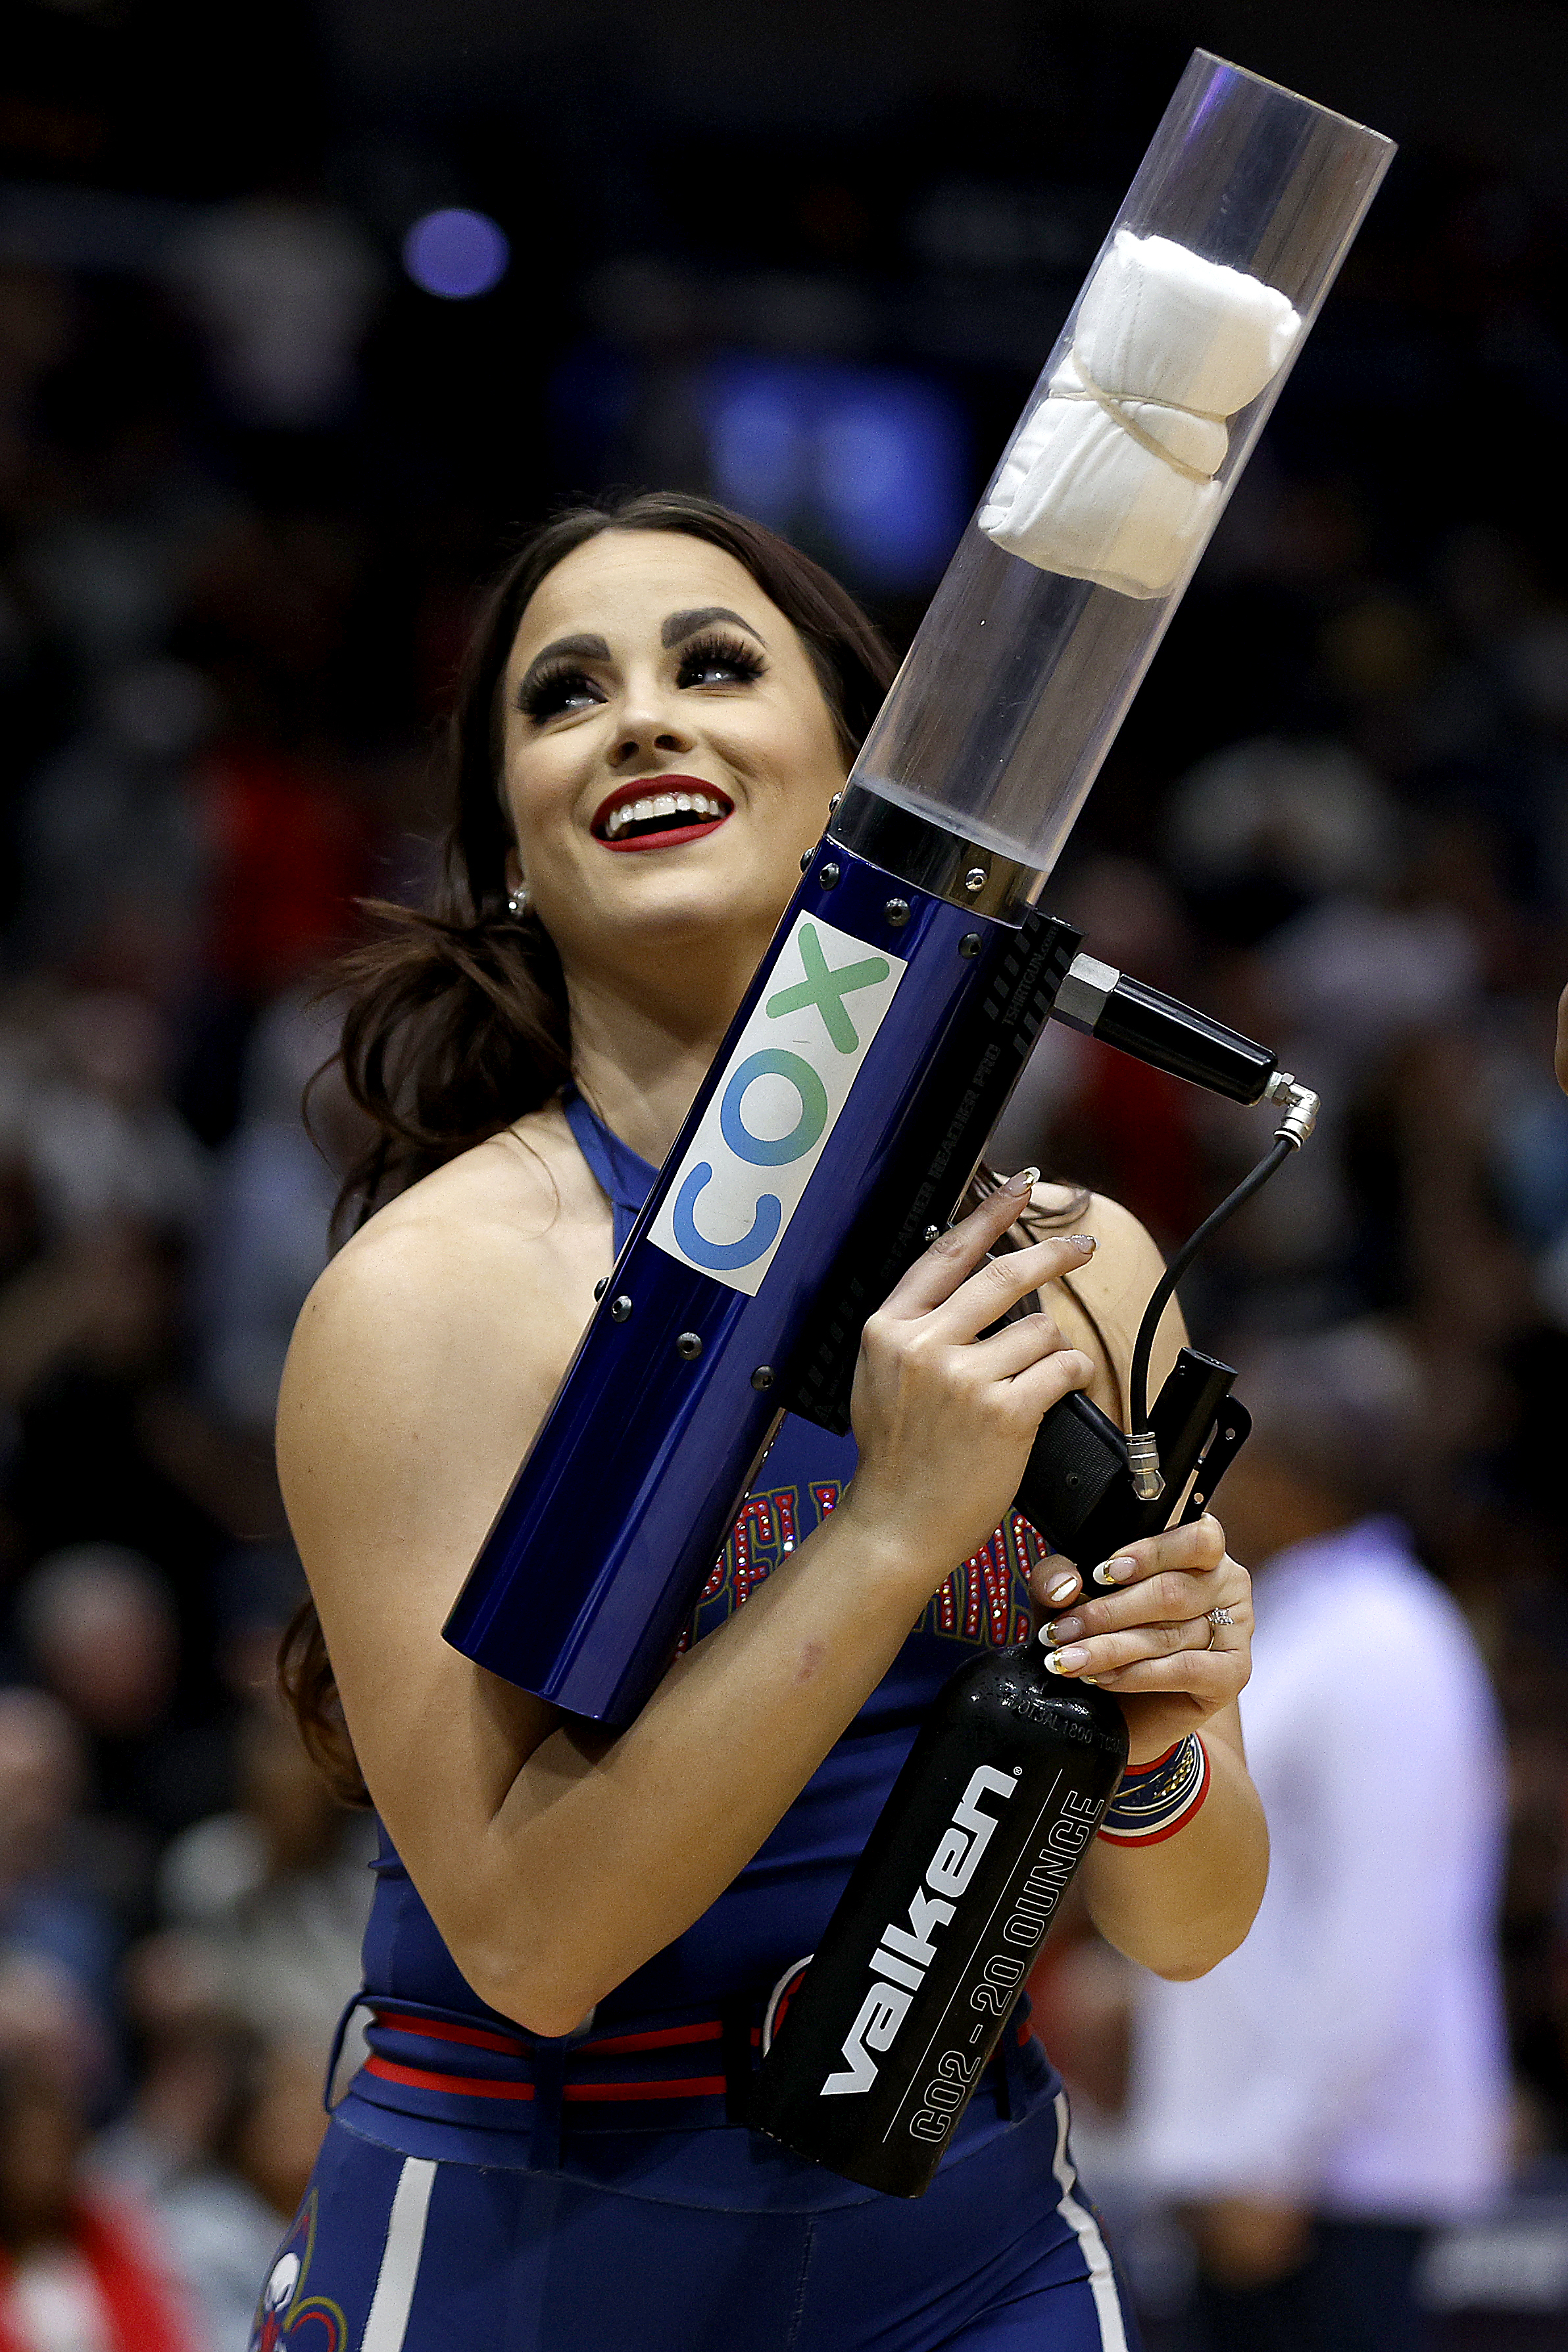 A woman holding a T-shirt cannon